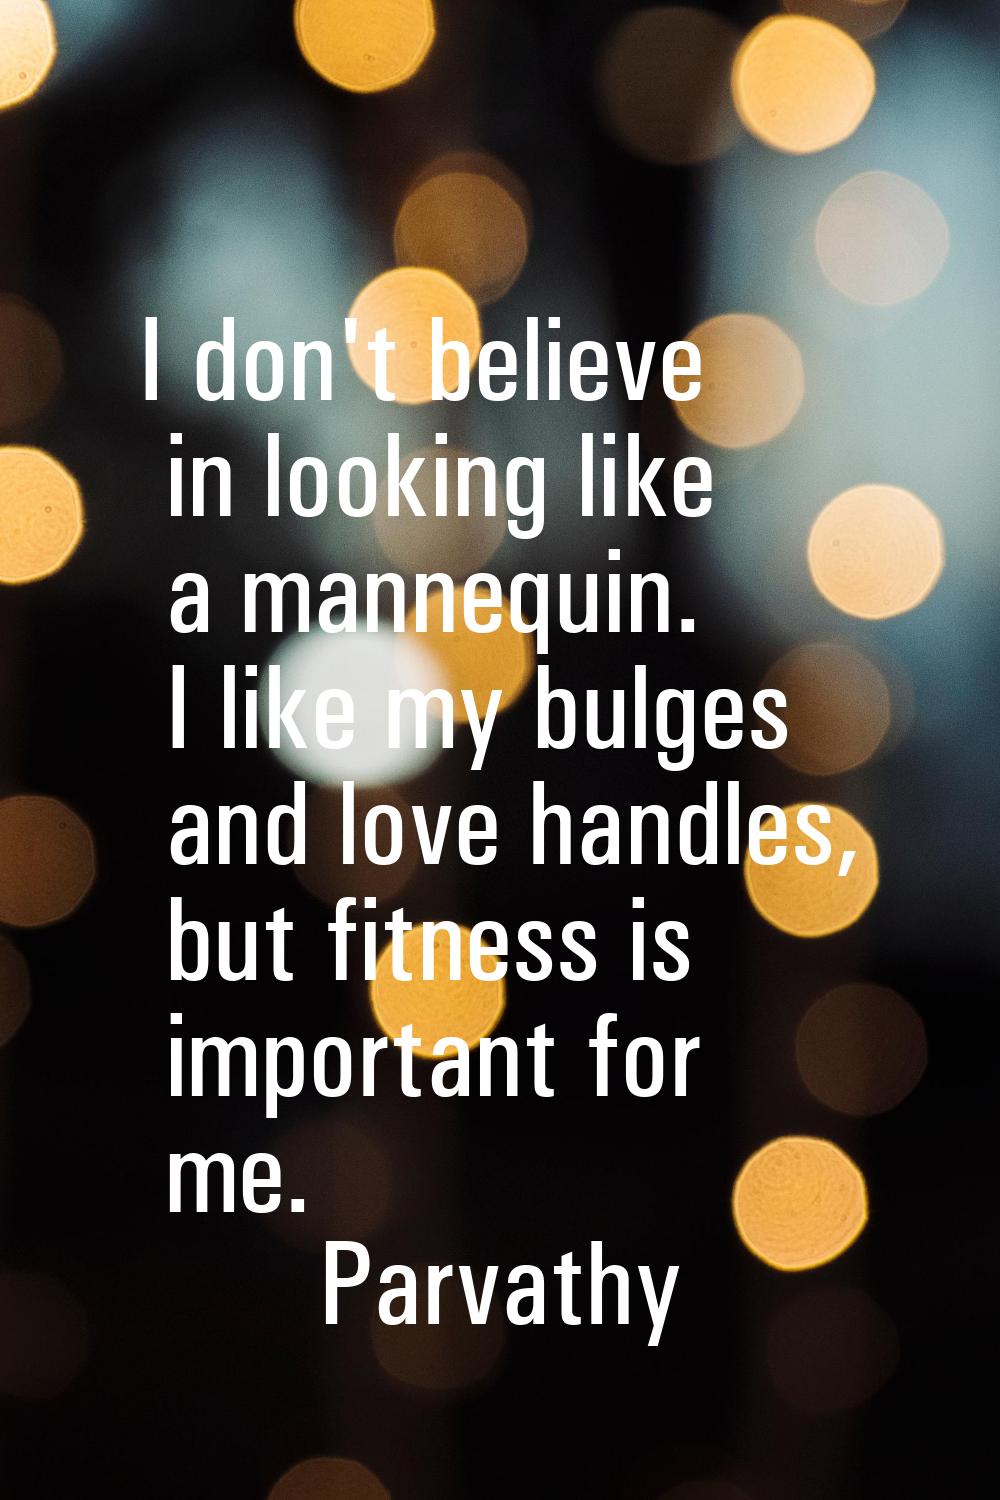 I don't believe in looking like a mannequin. I like my bulges and love handles, but fitness is impo